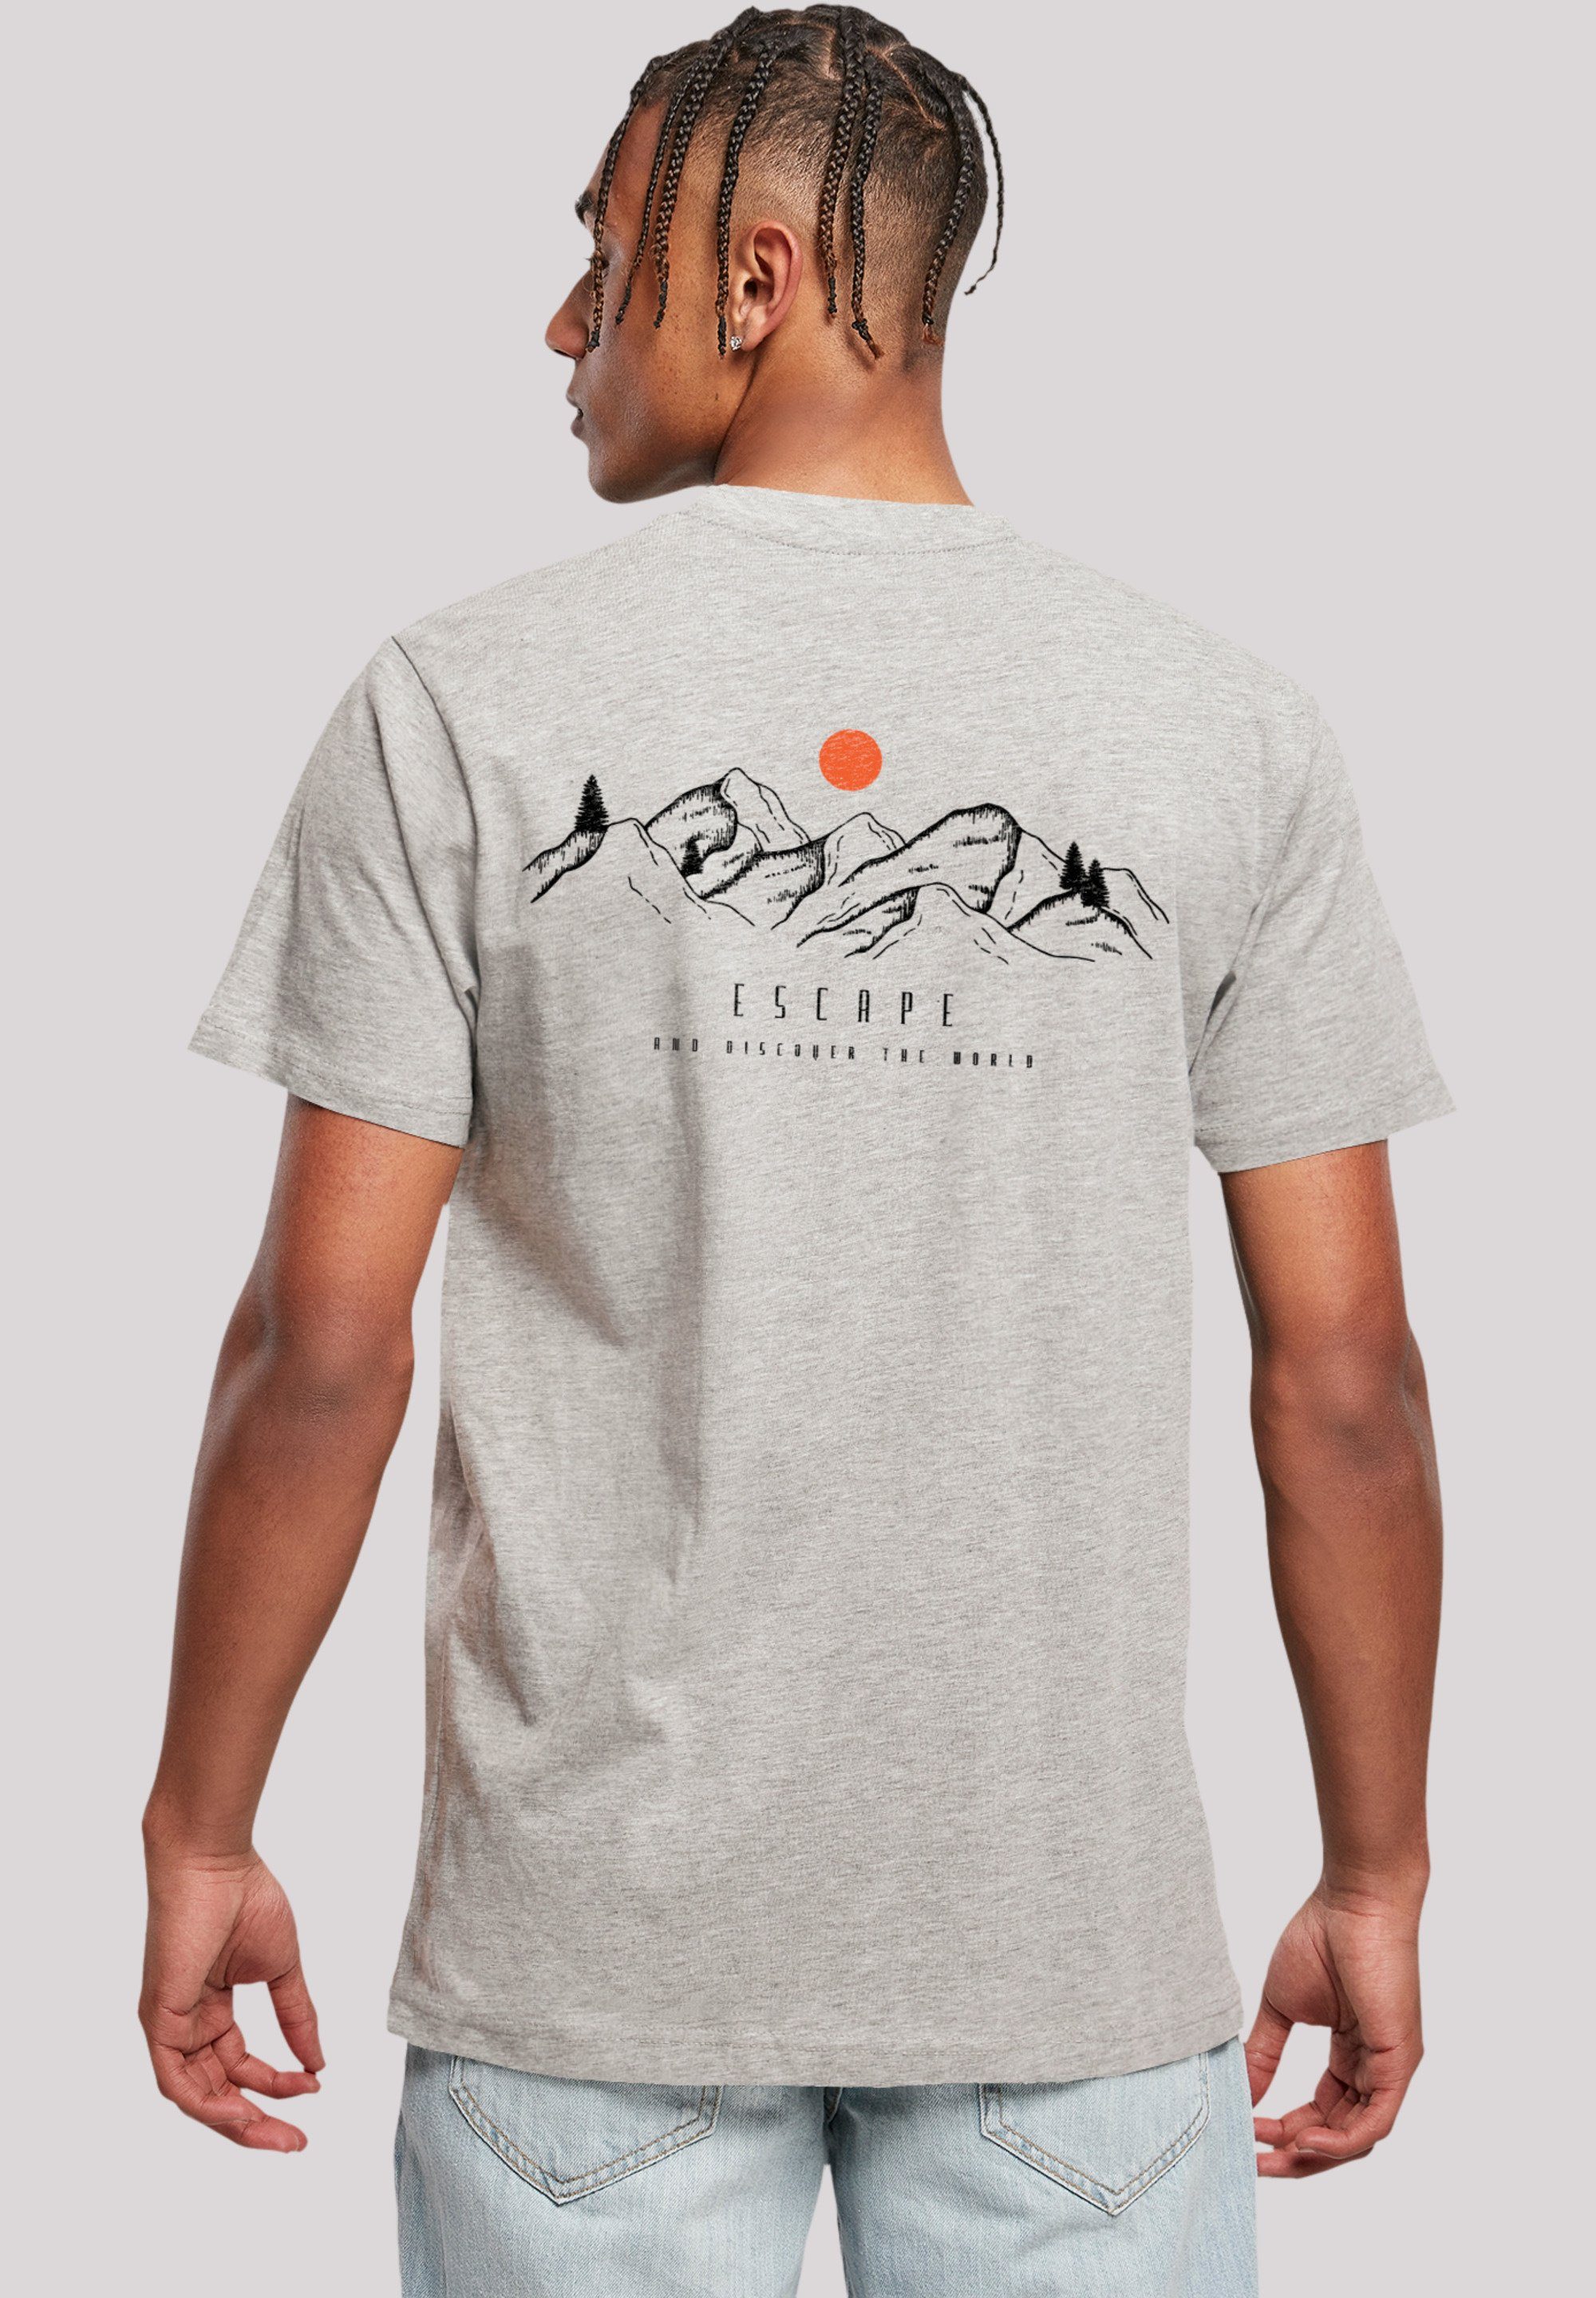 the Discover T-Shirt world F4NT4STIC grey heather Print